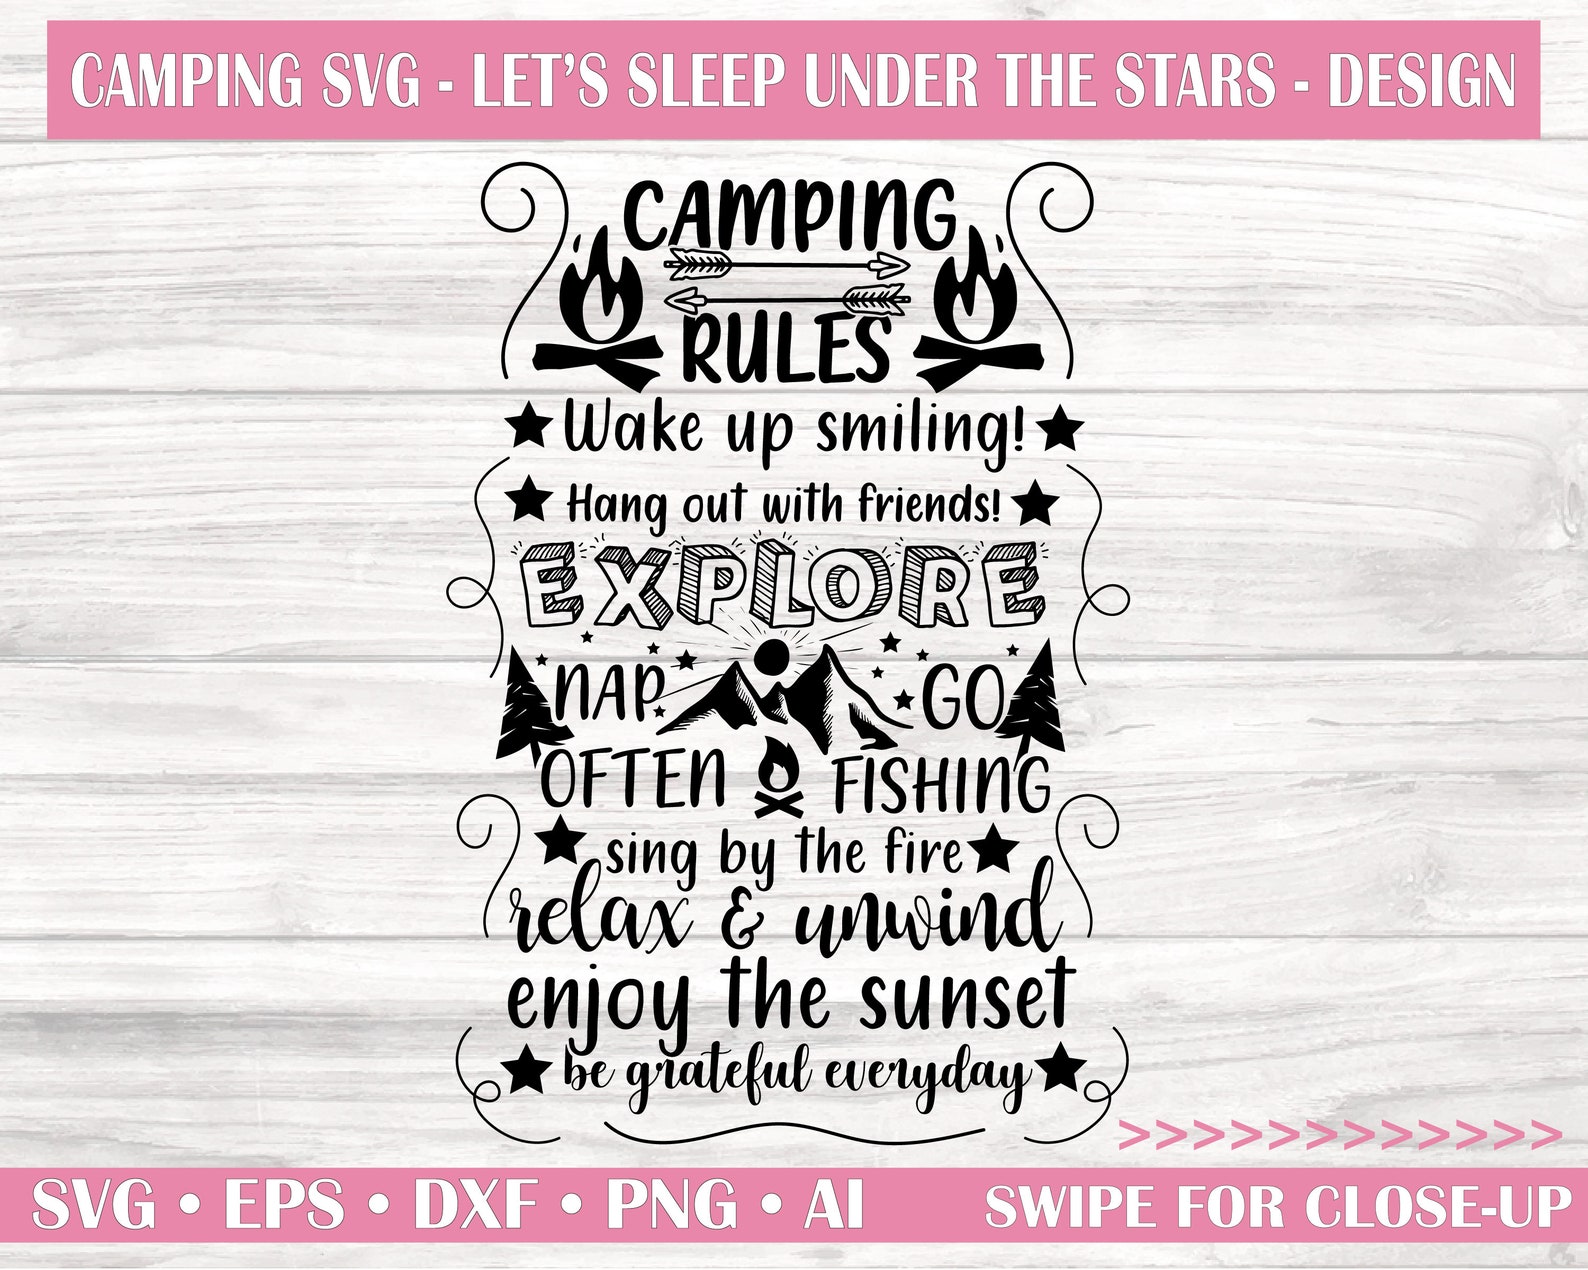 Campsite Rules. Rules svg. Camping rules